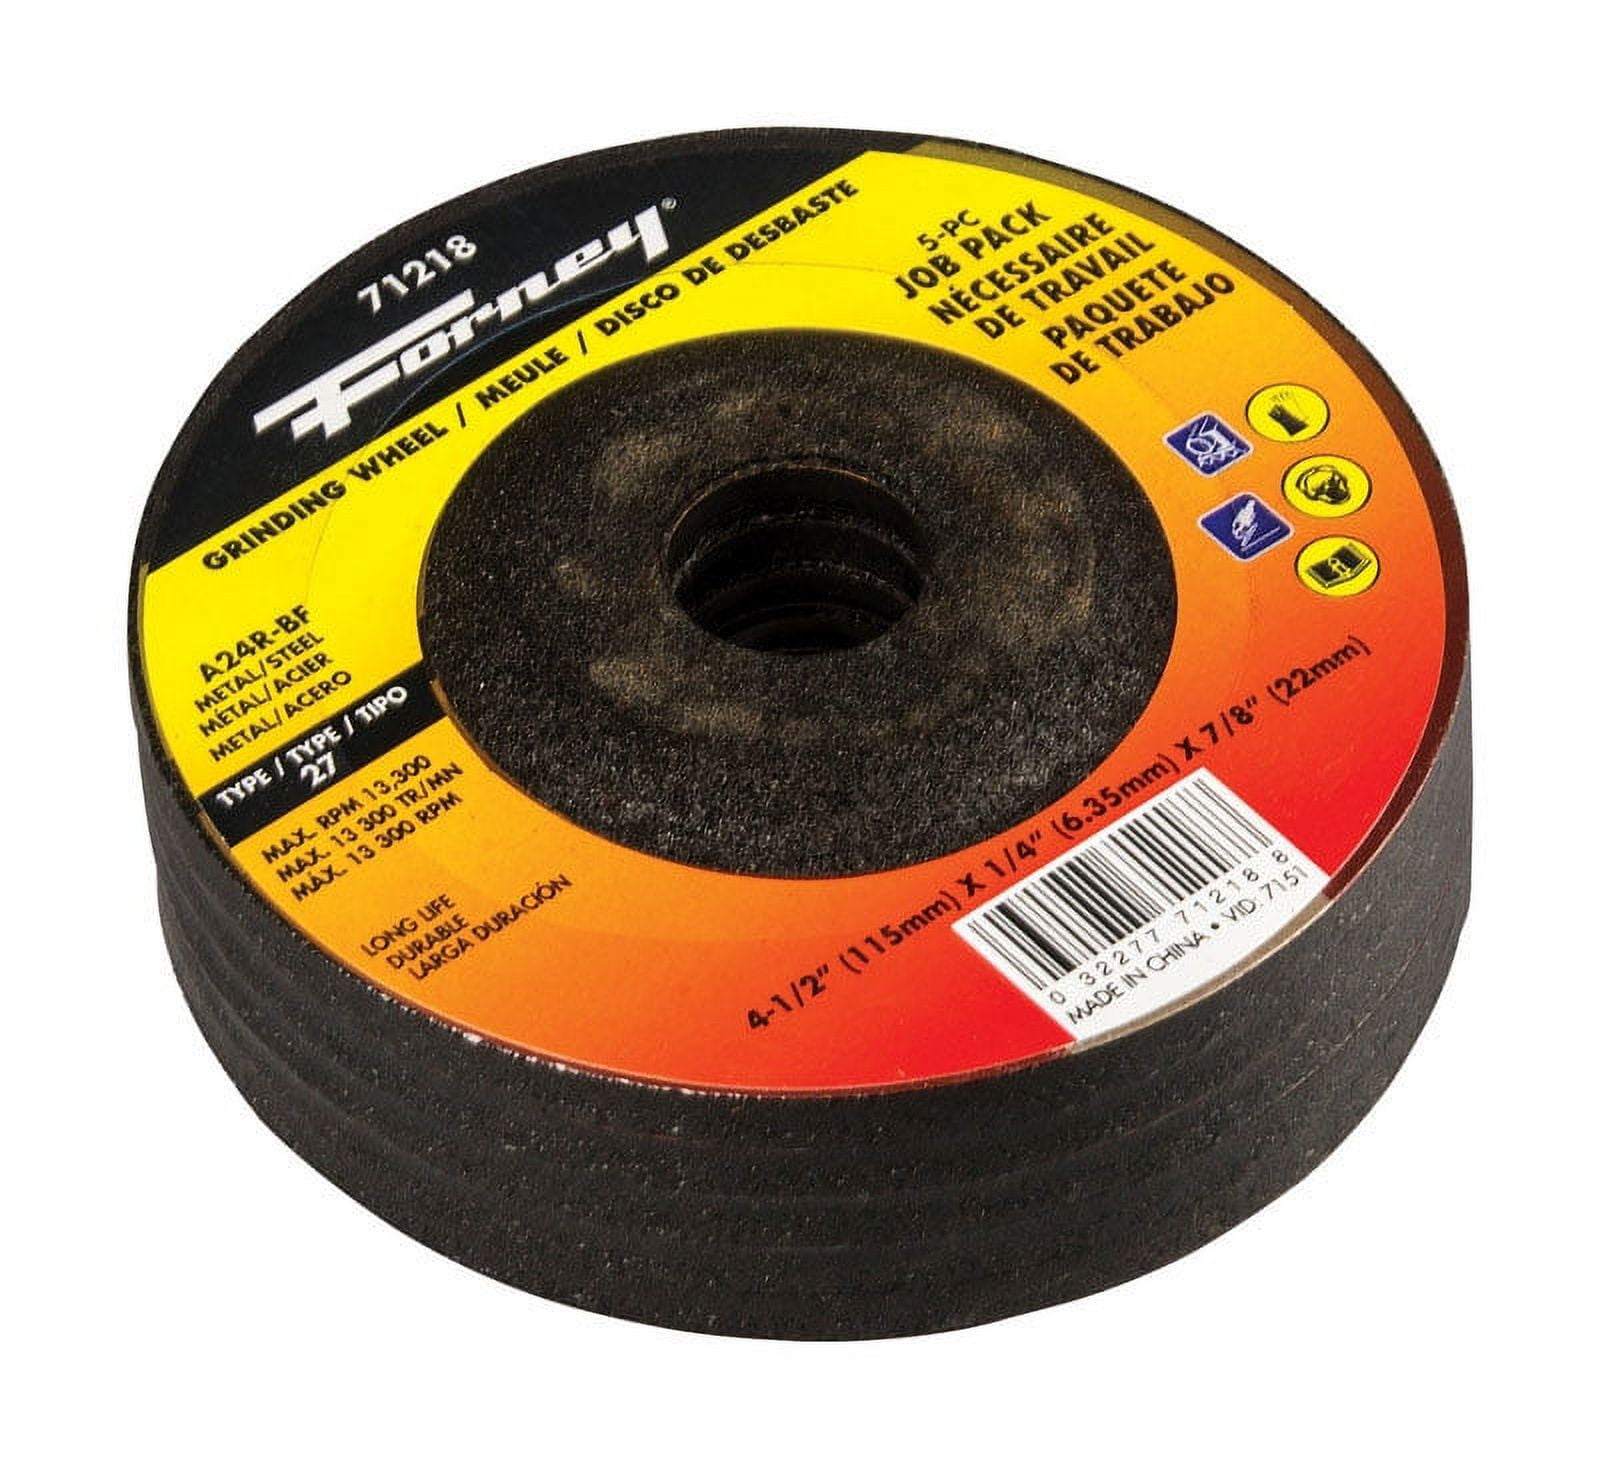 2601599 4.5 In. Dia. X 0.25 In. Thick X 0.88 In. Grinding Wheel, 13300 Rpm - Pack Of 5